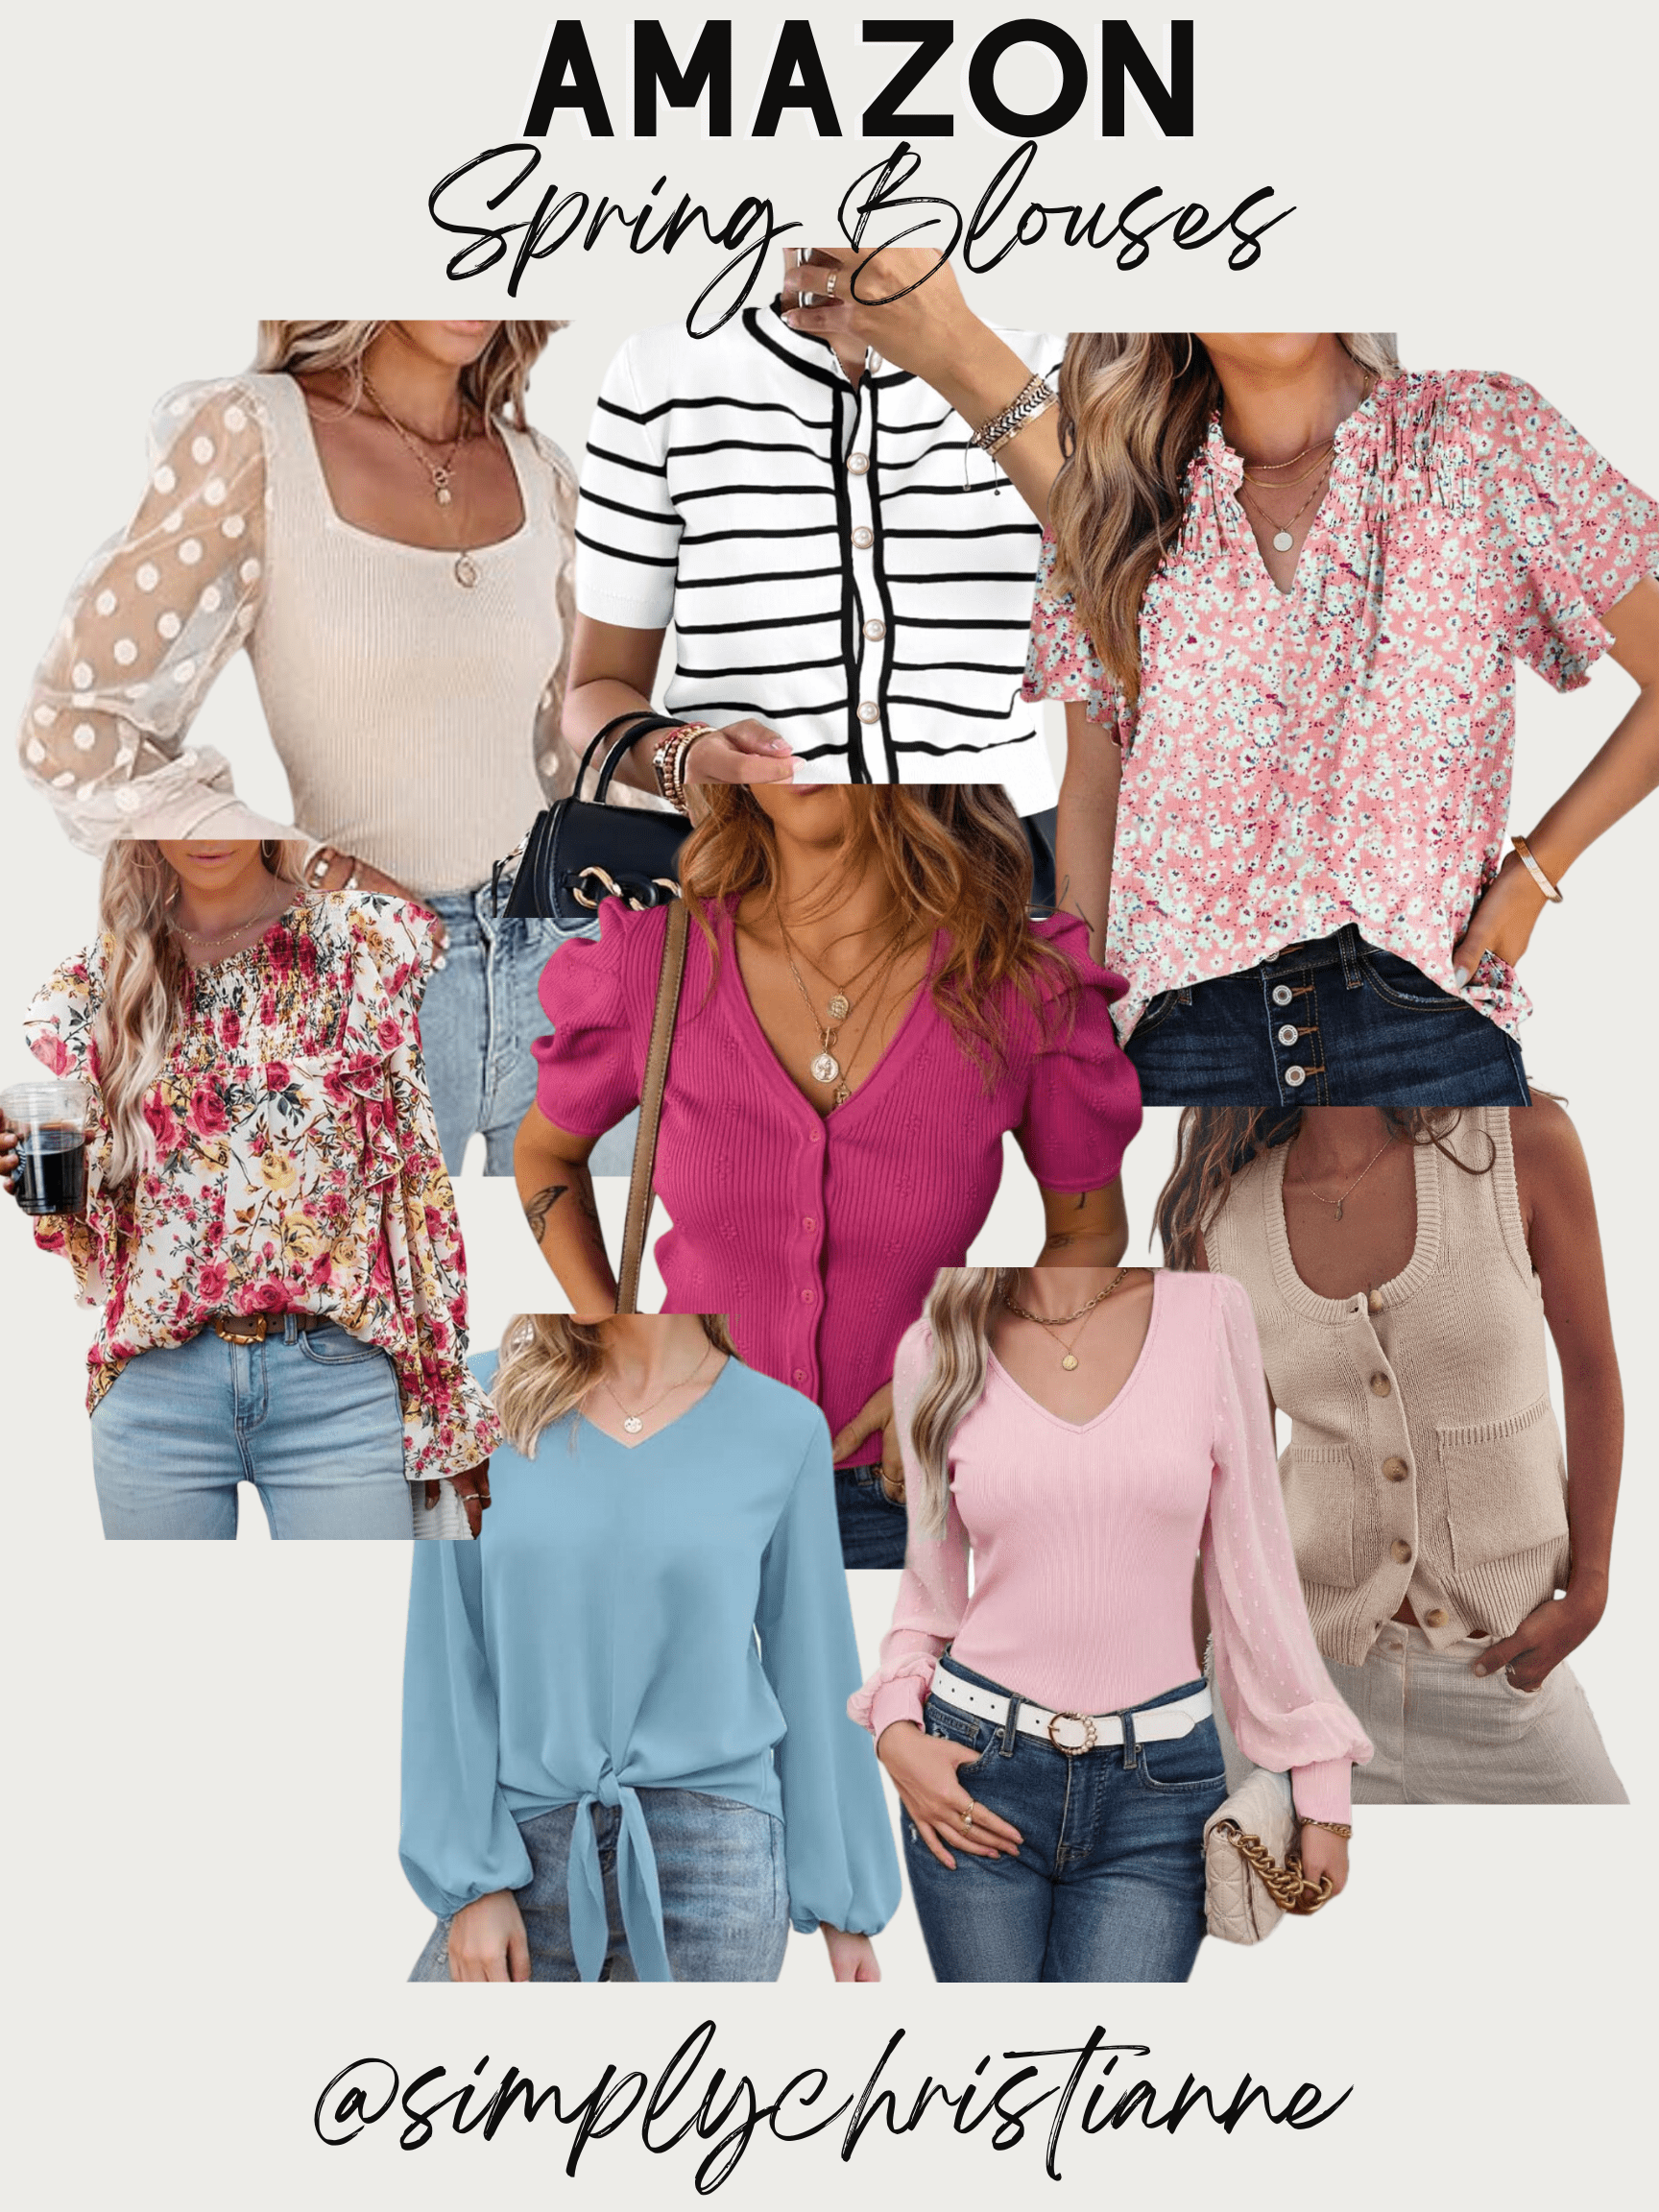 Chic Spring Blouses from Amazon